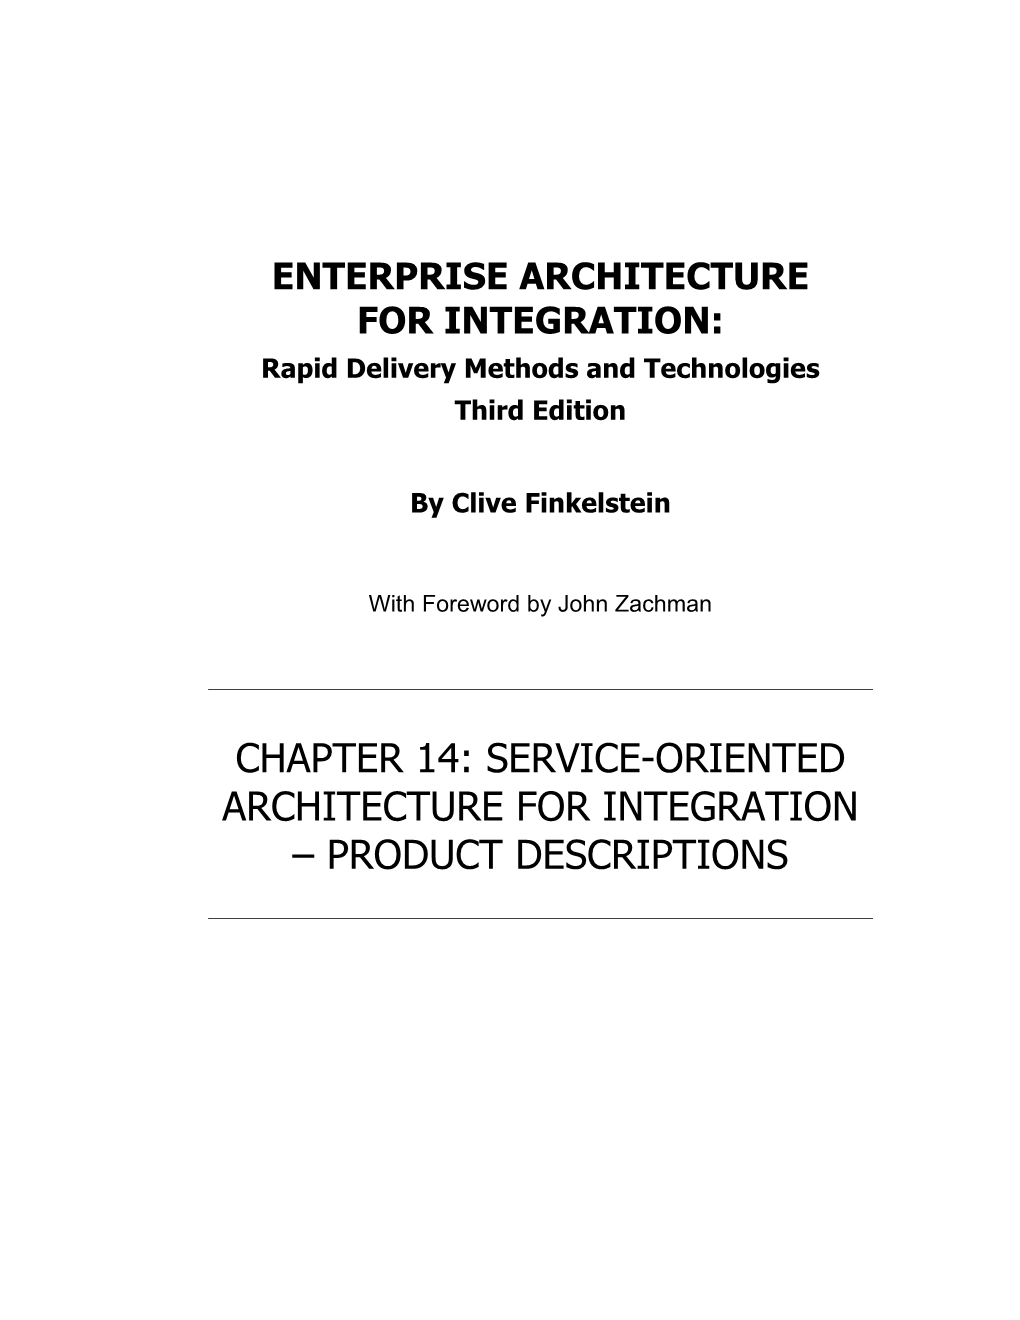 CHAPTER 14: SERVICE-ORIENTED ARCHITECTURE for INTEGRATION – PRODUCT DESCRIPTIONS Chapter 14: Service-Oriented Architecture Product Descriptions I